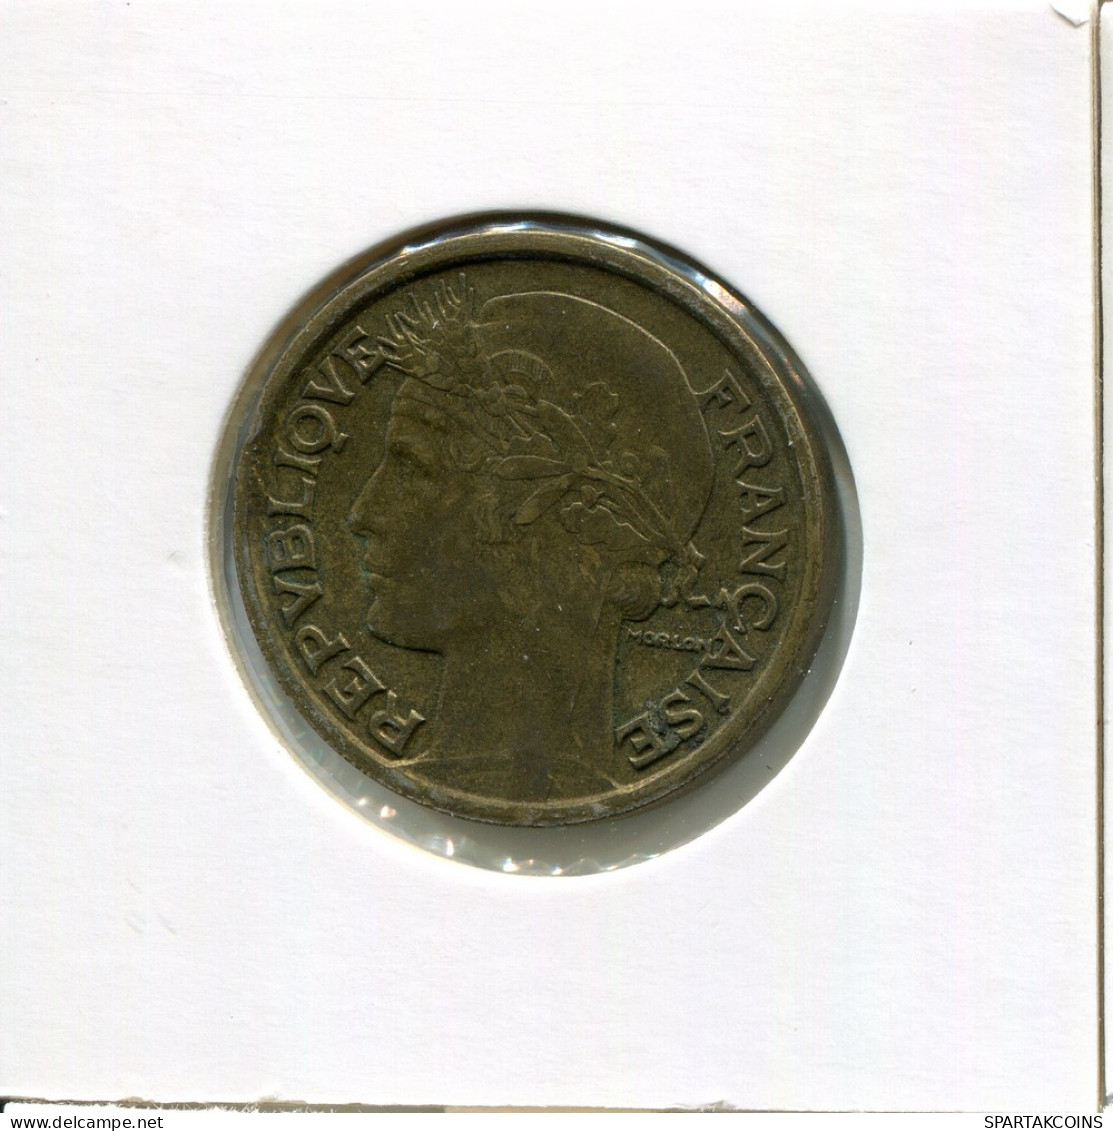 2 FRANCS 1941 FRANCE French Coin #AN344 - 2 Francs